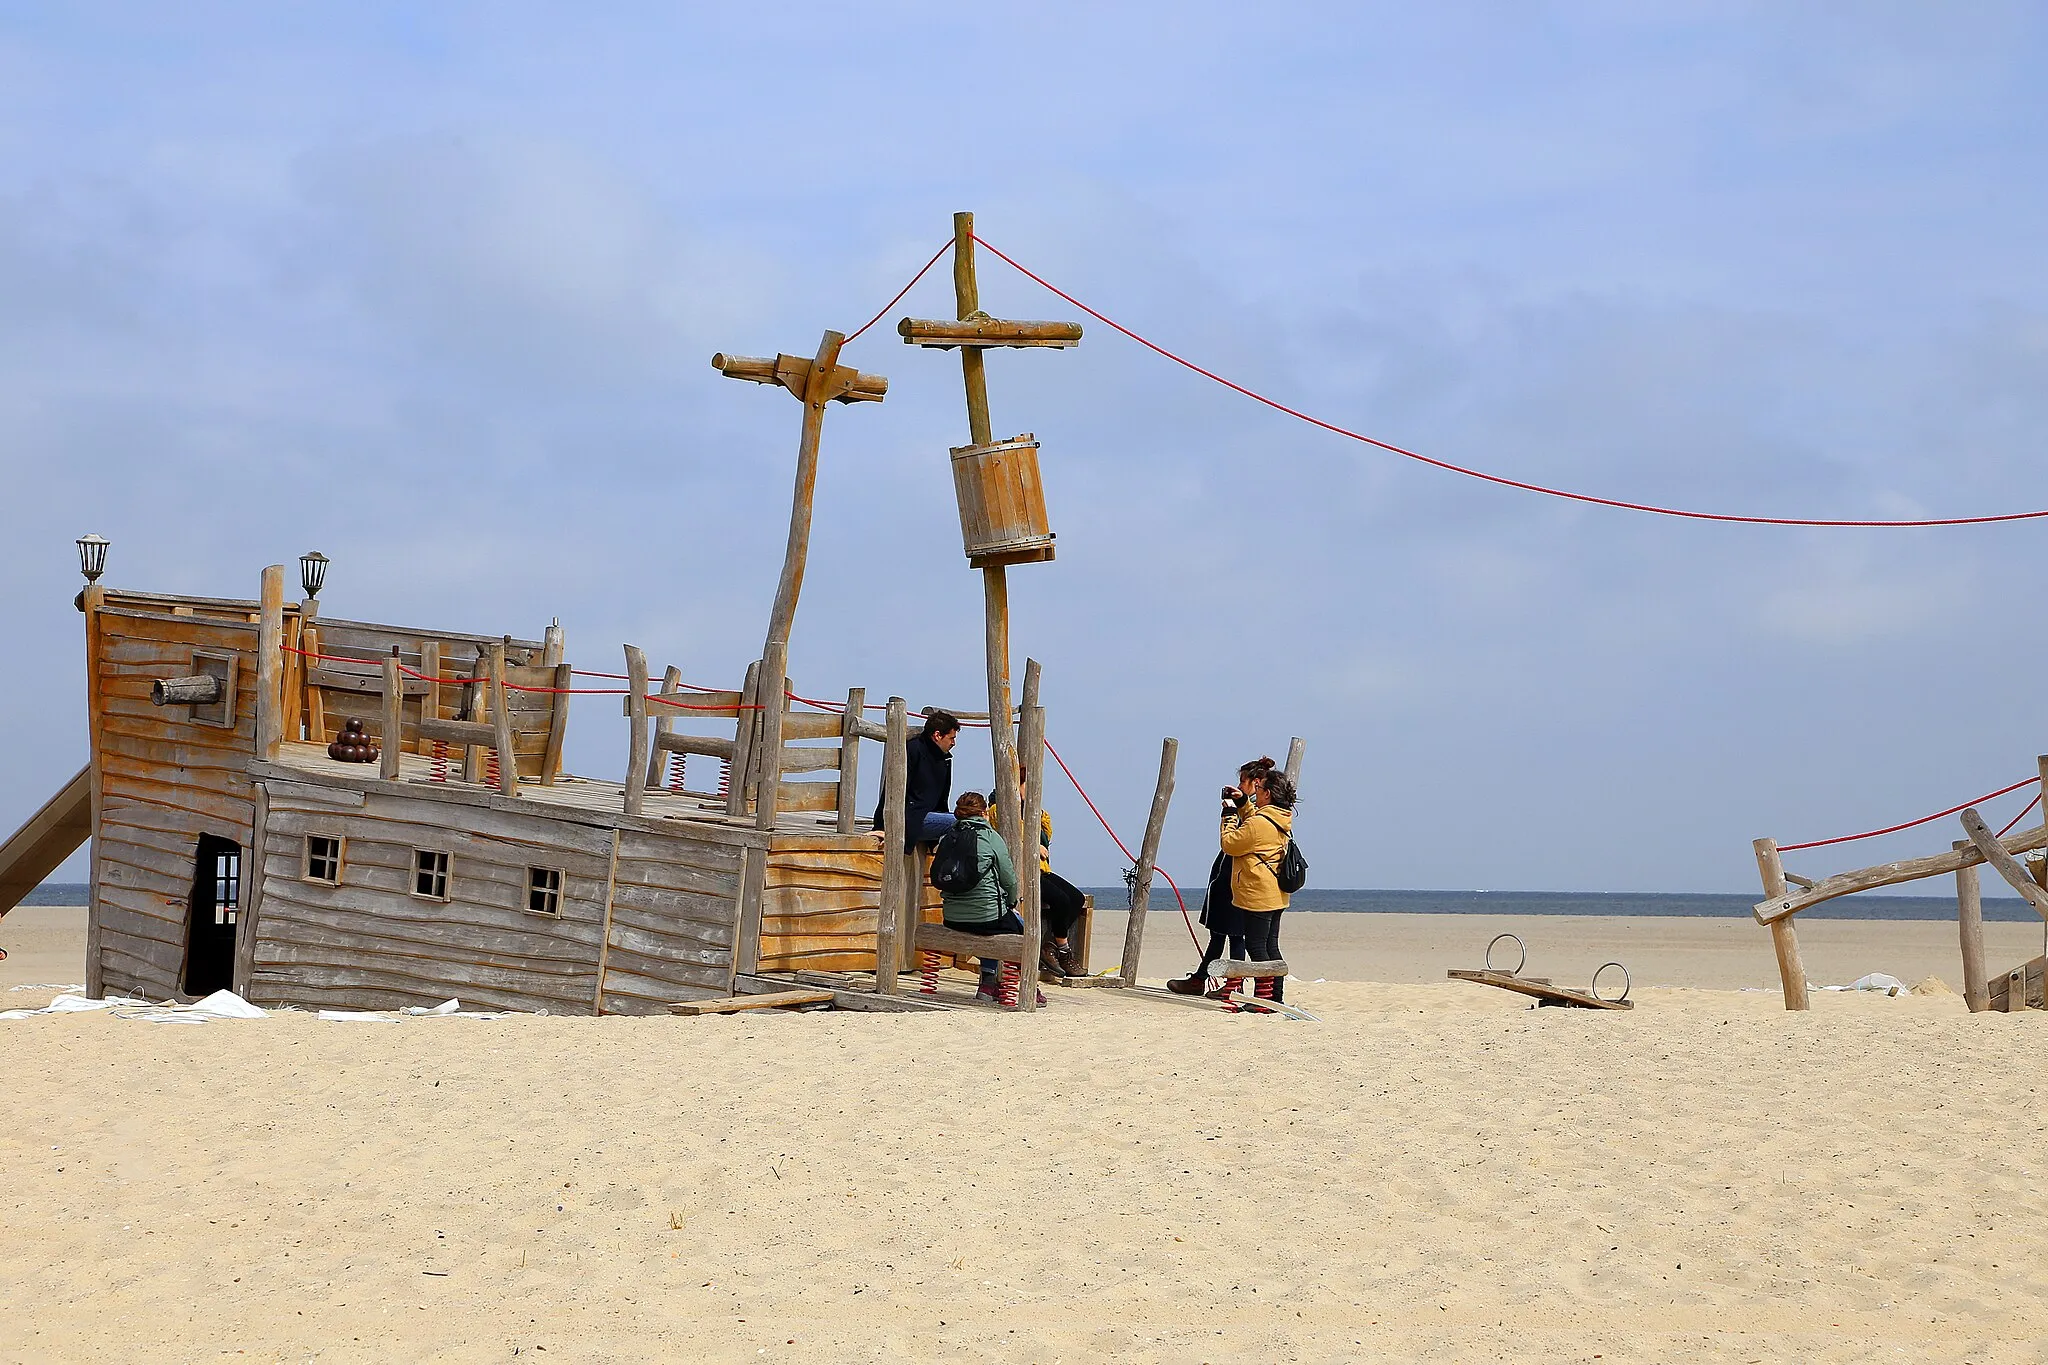 Photo showing: Adventure playground on the beach of the seaside resort Vrouwenpolder, a village in the Dutch province of Zeeland.